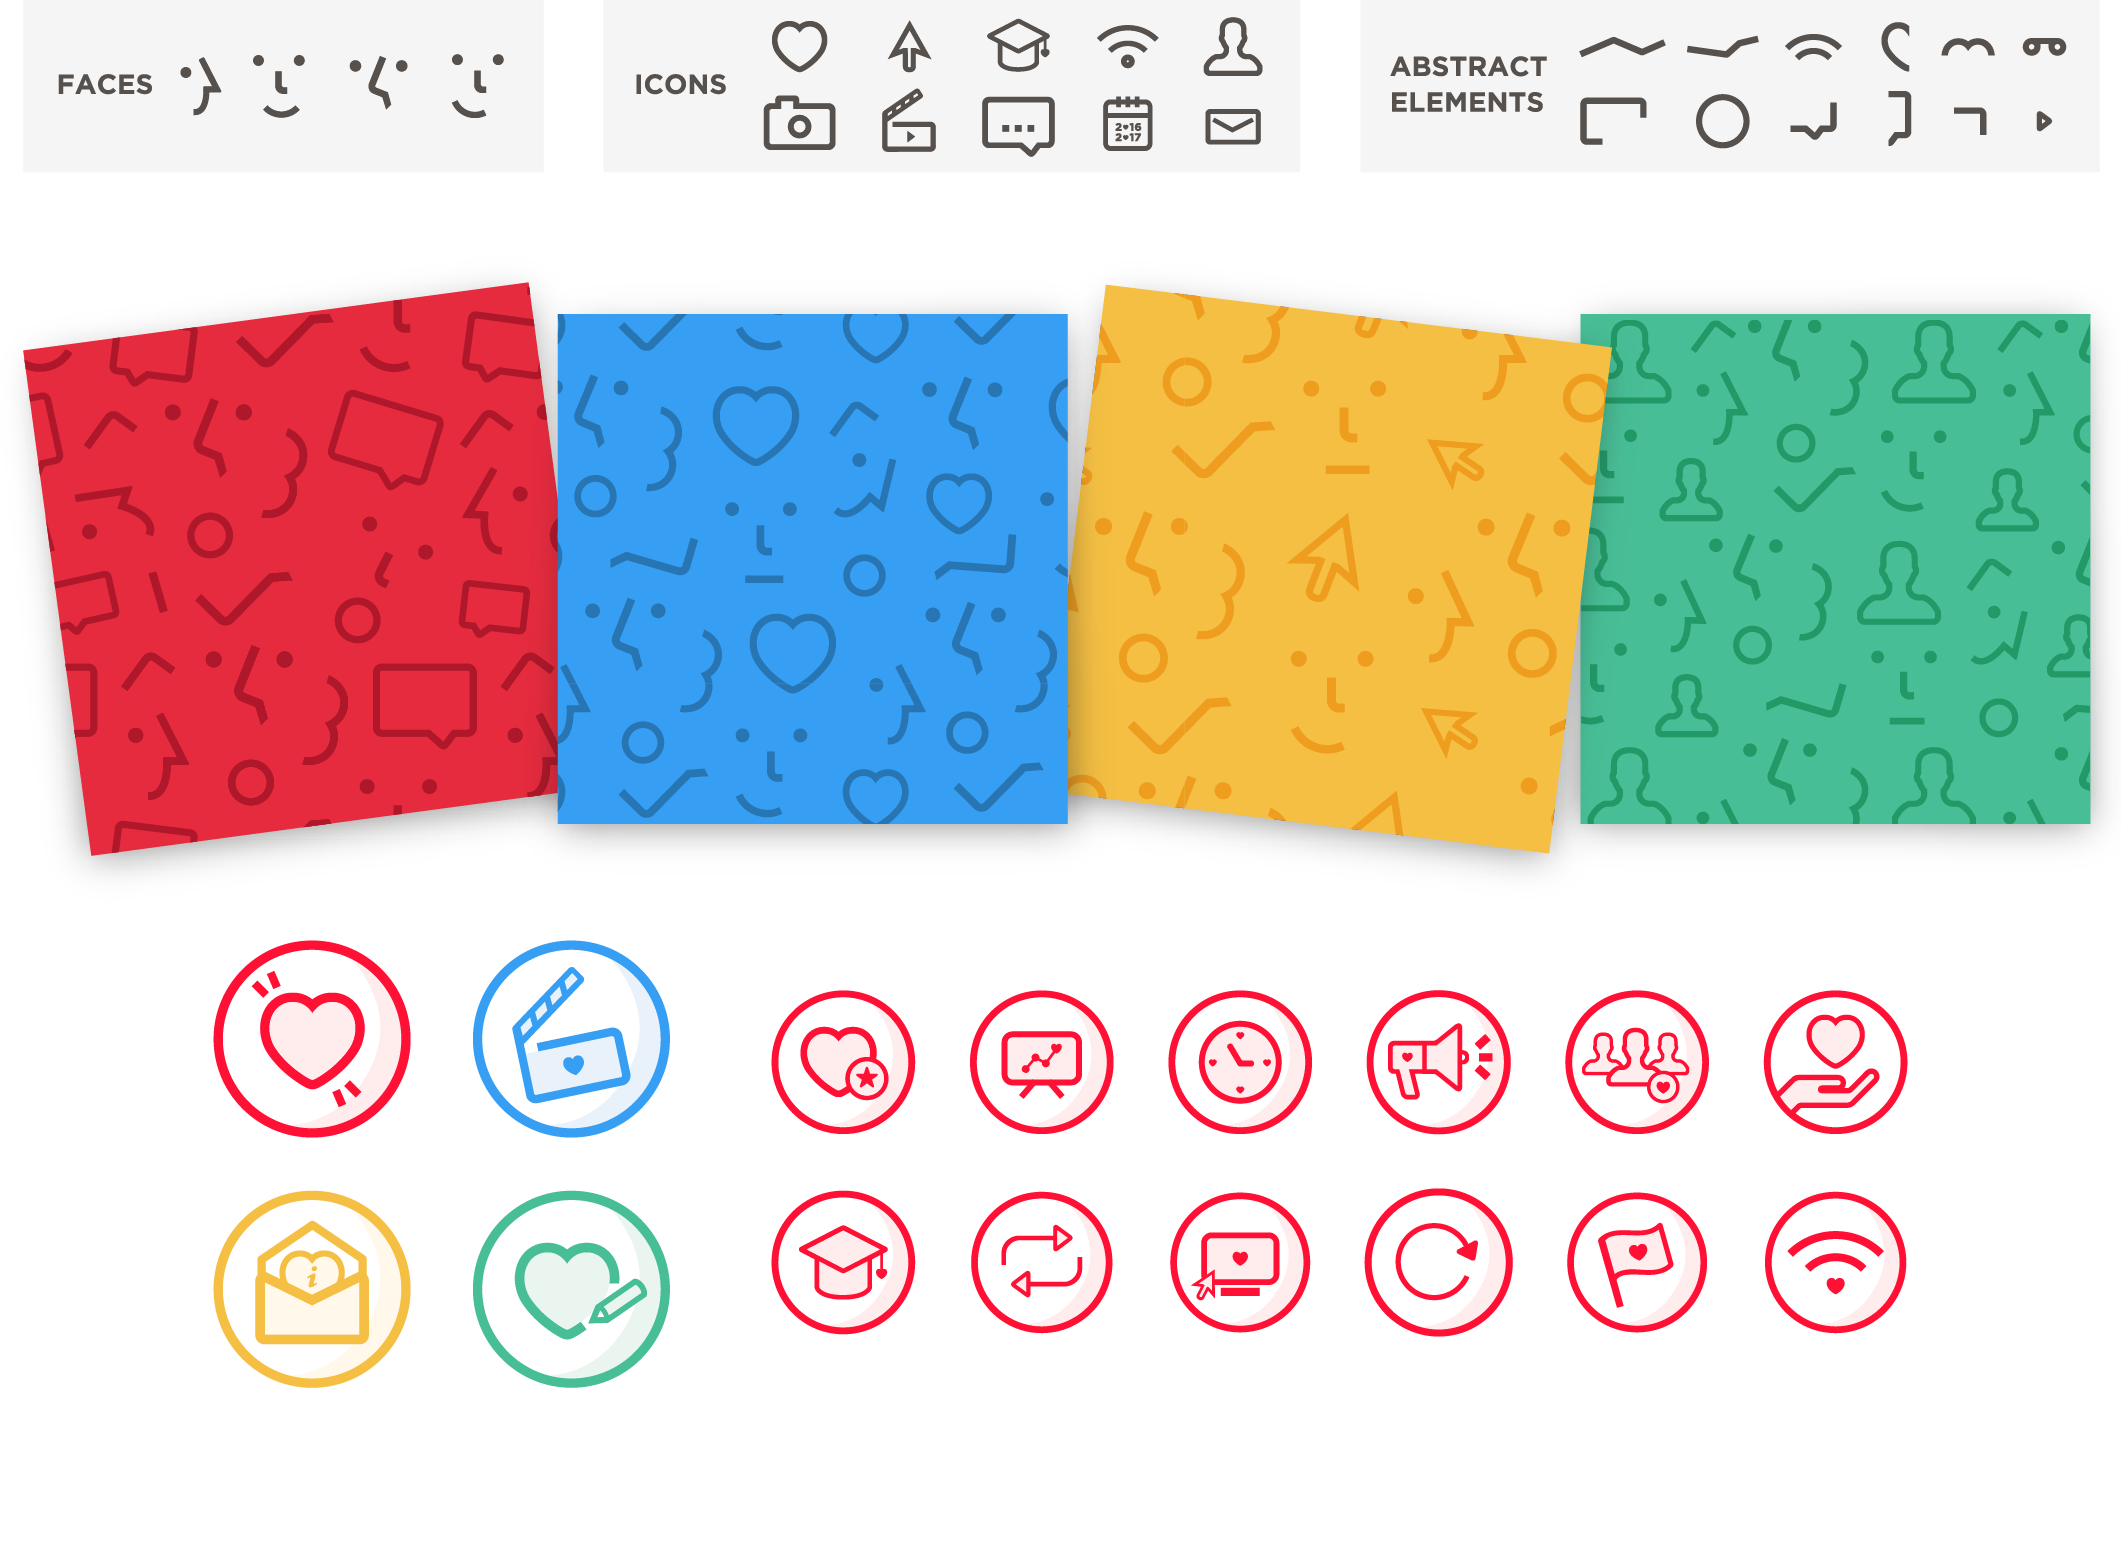 image of palette and icons